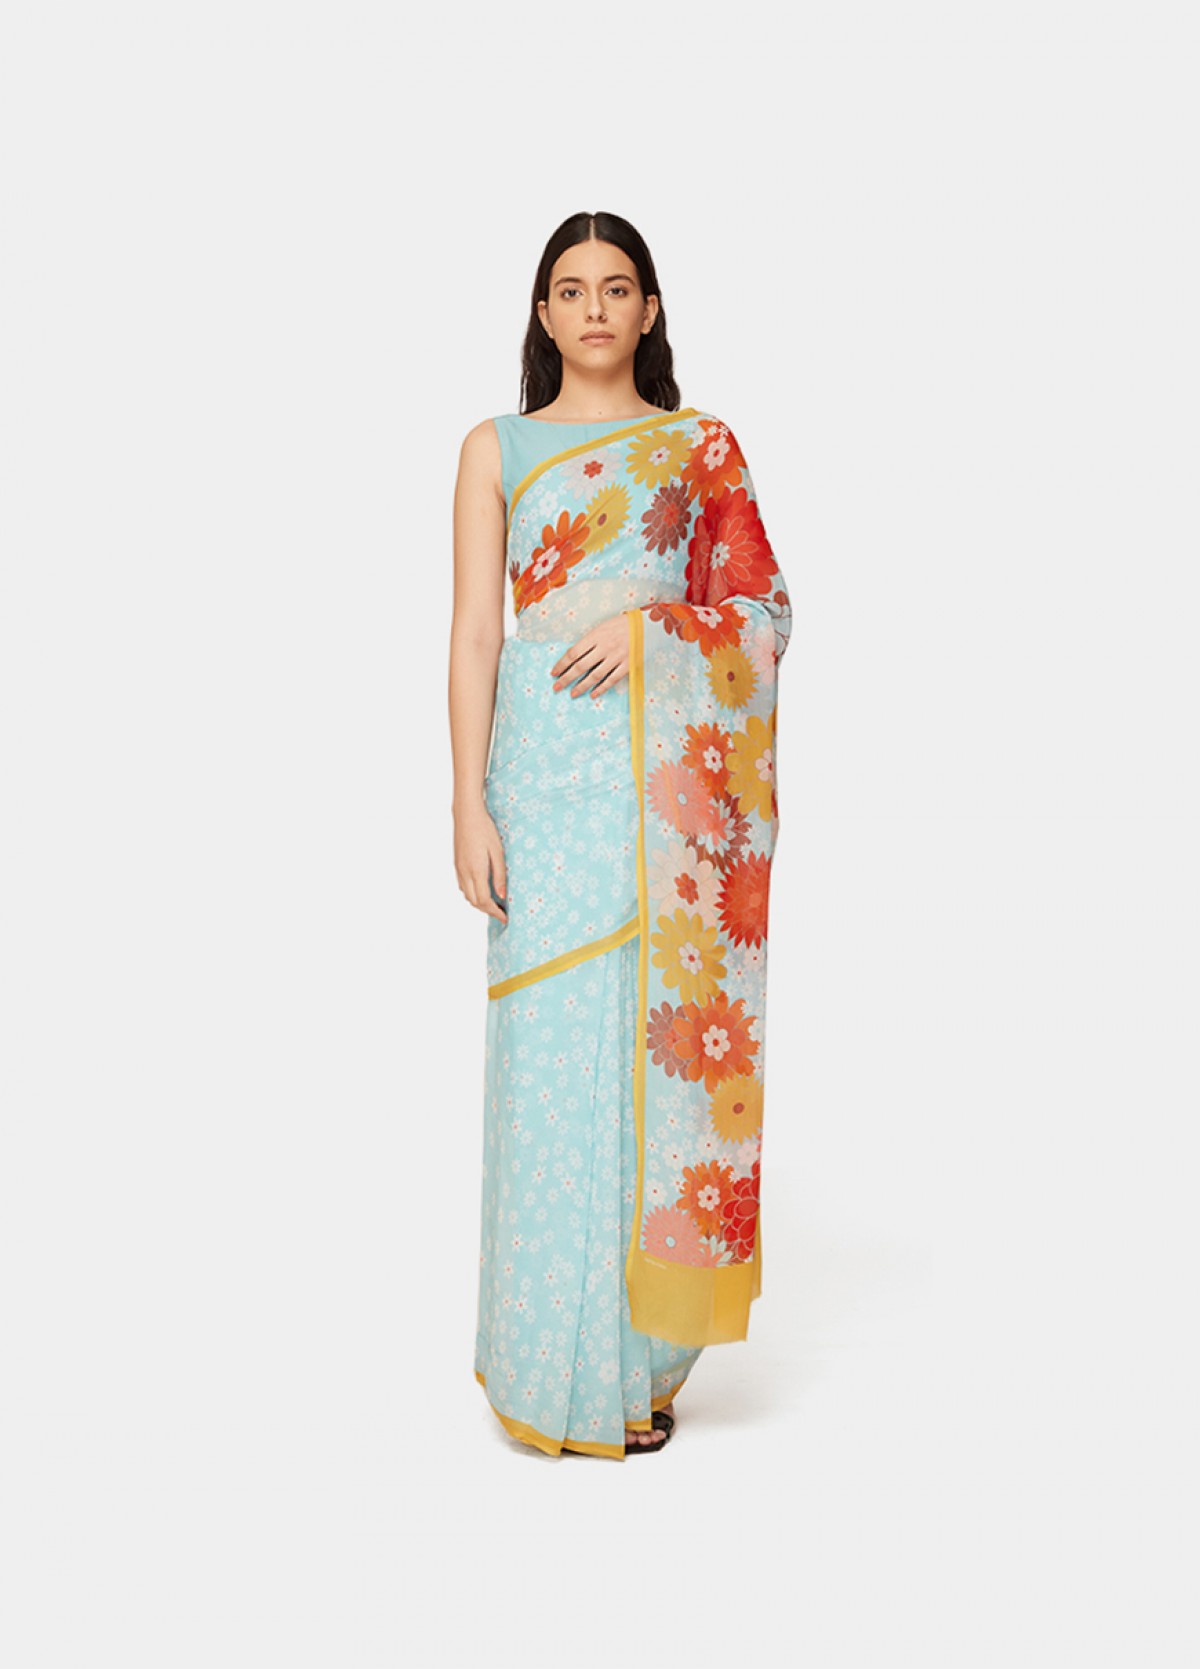 The Valley of Flowers Sari